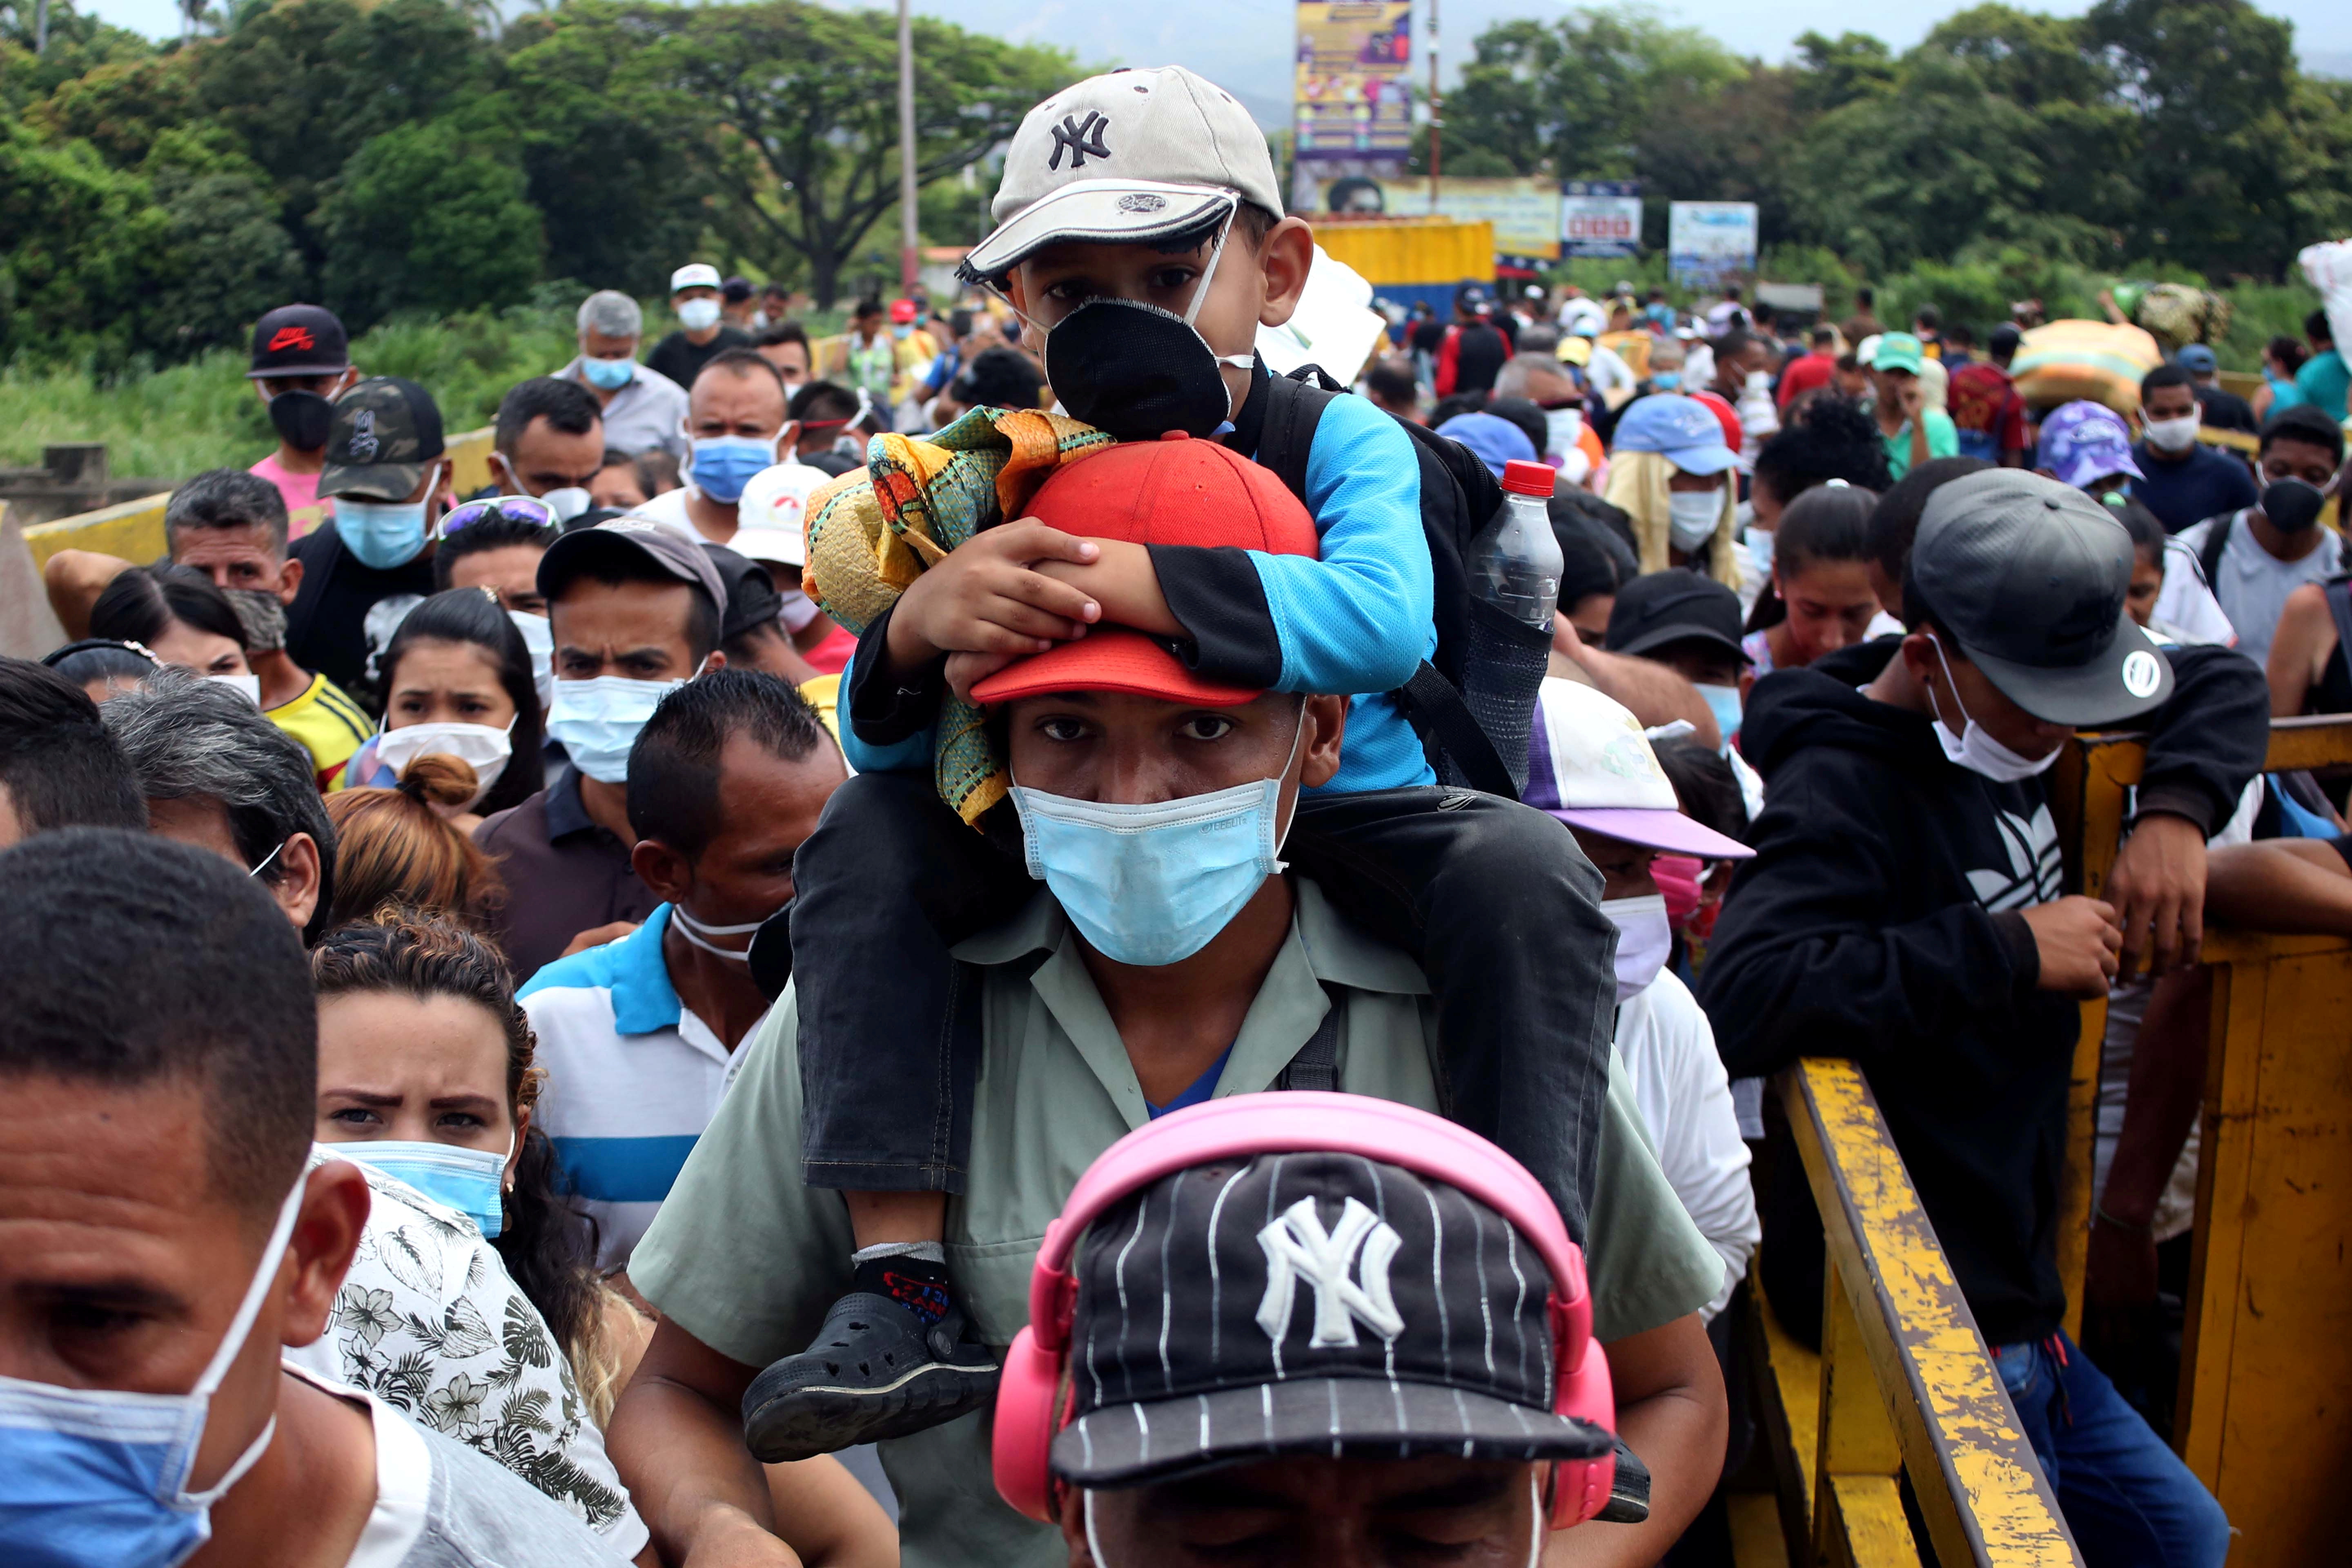 People wearing protective face masks line up to cross the border between Colombia and Venezuela at Simon Bolivar international bridge in Cucuta